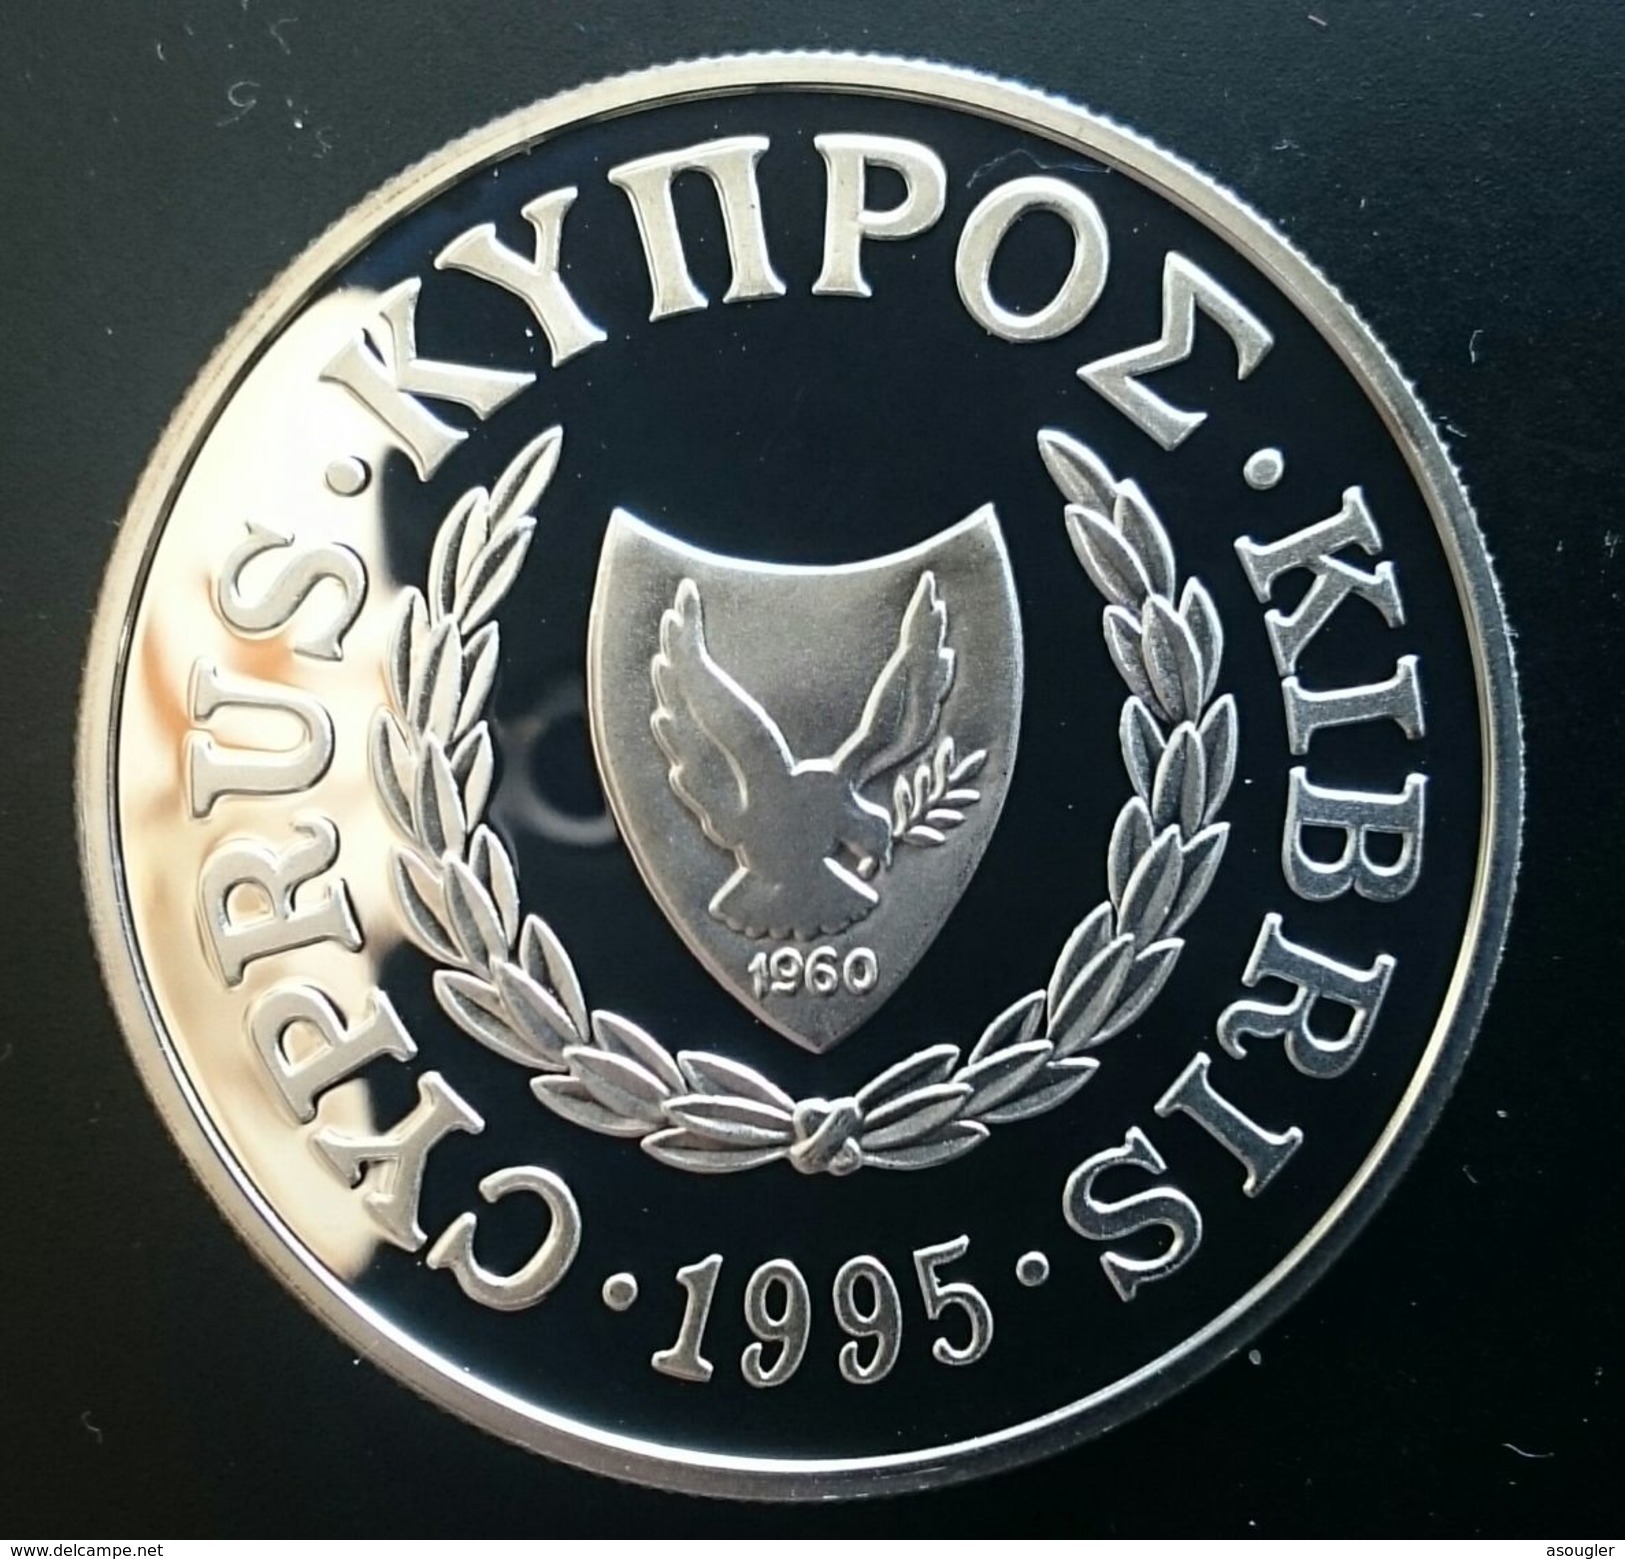 CYPRUS 1 POUND 1995 SILVER PROOF "50th Anniversary - United Nations 1945-1995" Free Shipping Via Registered Air Mail - Zypern